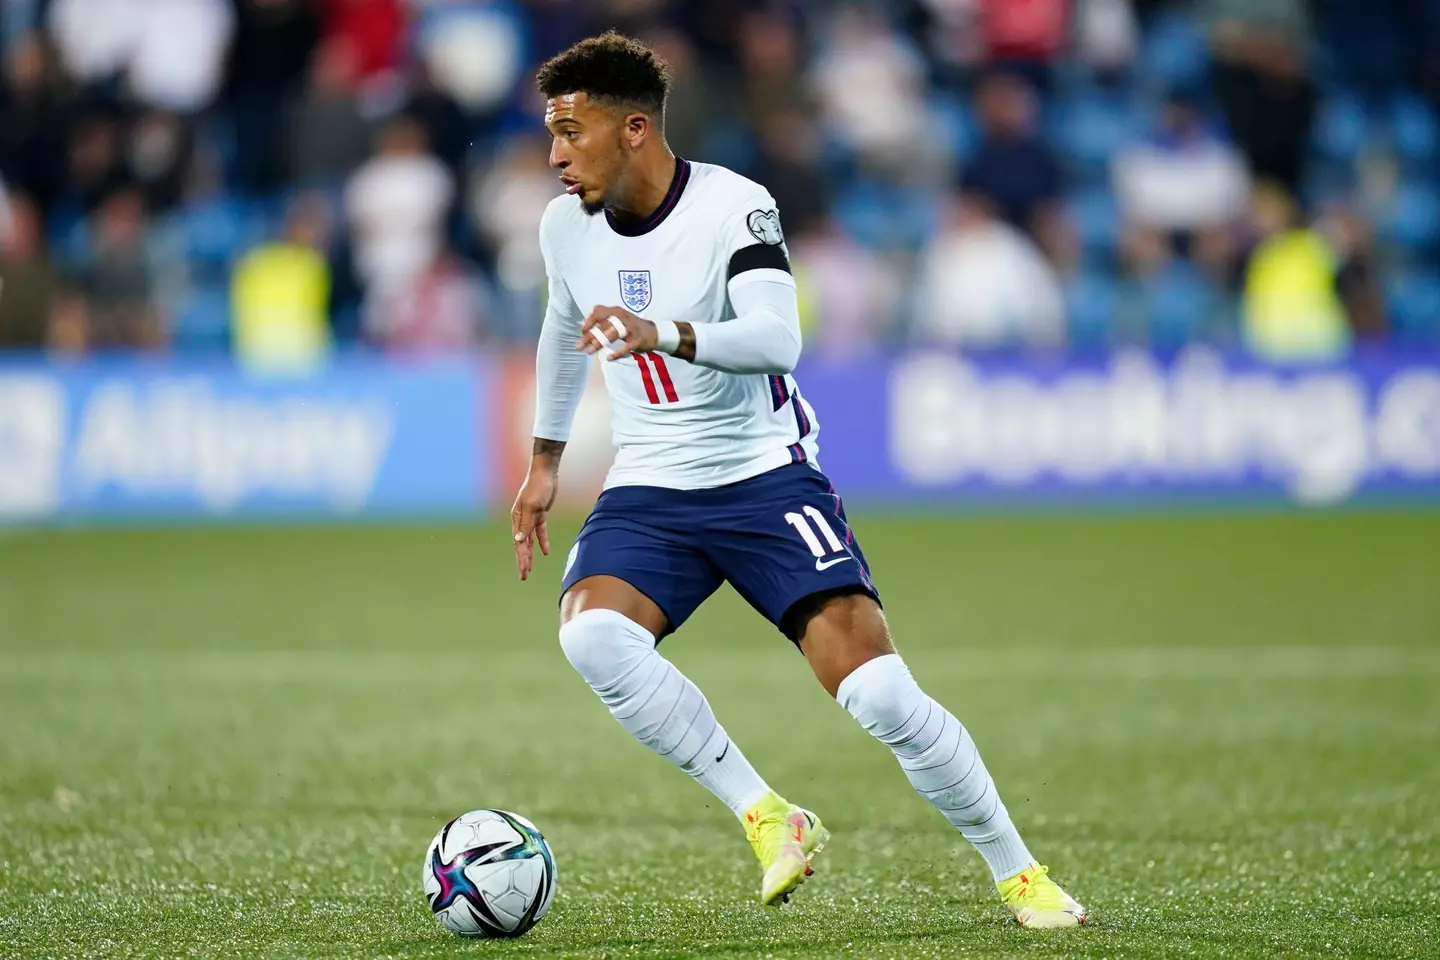 Sancho during his last England appearance. (Image